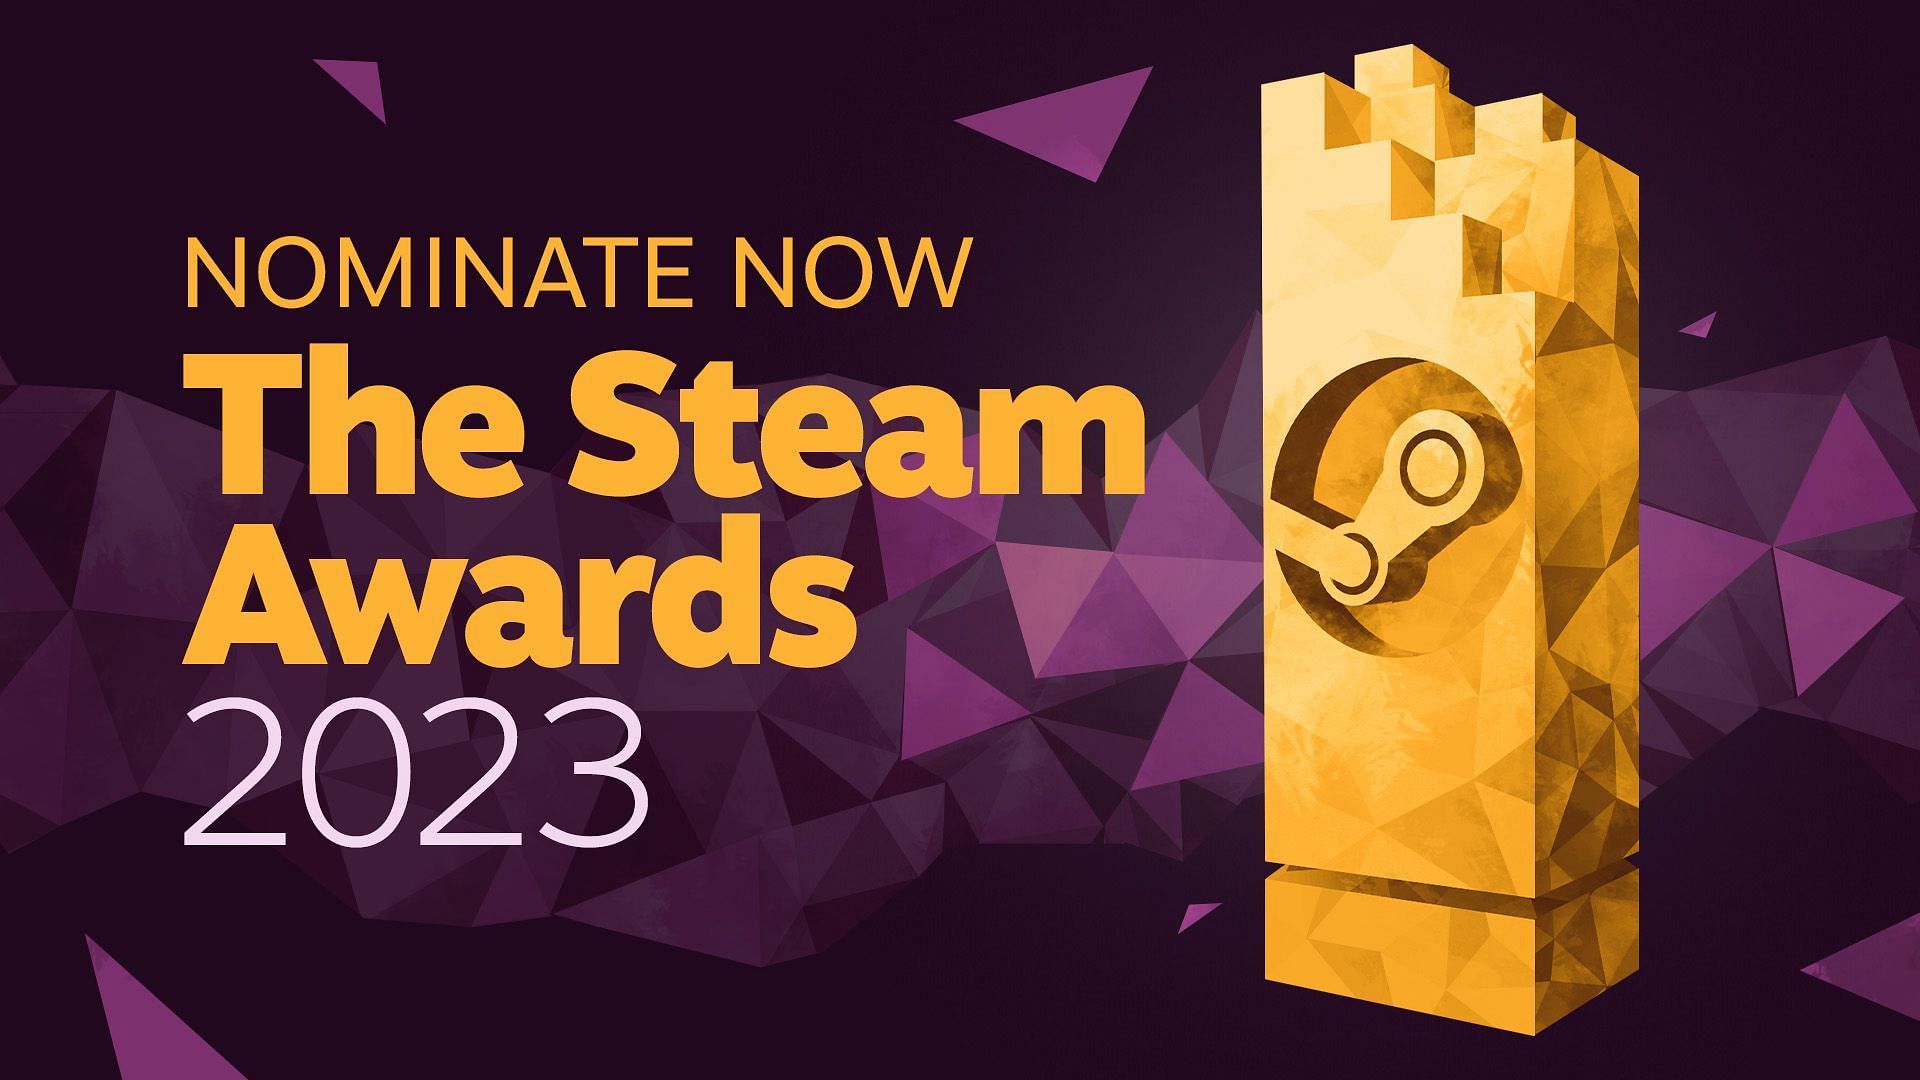 The Steam Awards 2023 All nominees, how to vote, and more